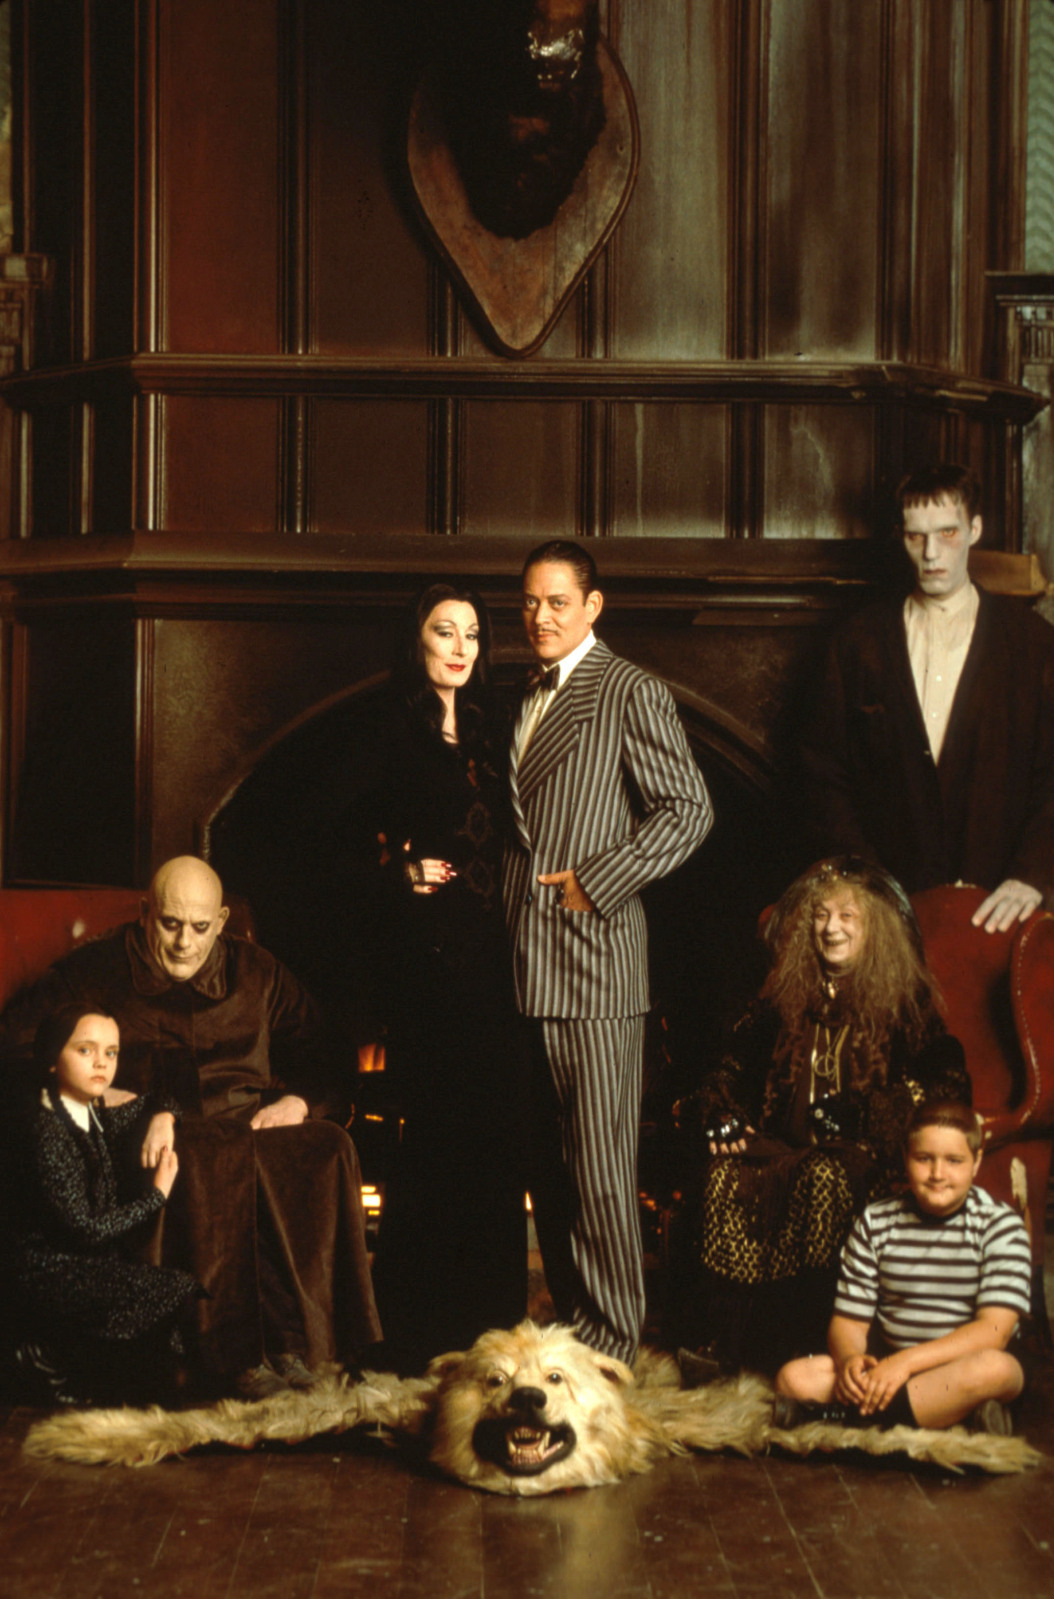 HQ Addams Family Values Wallpapers | File 393.7Kb